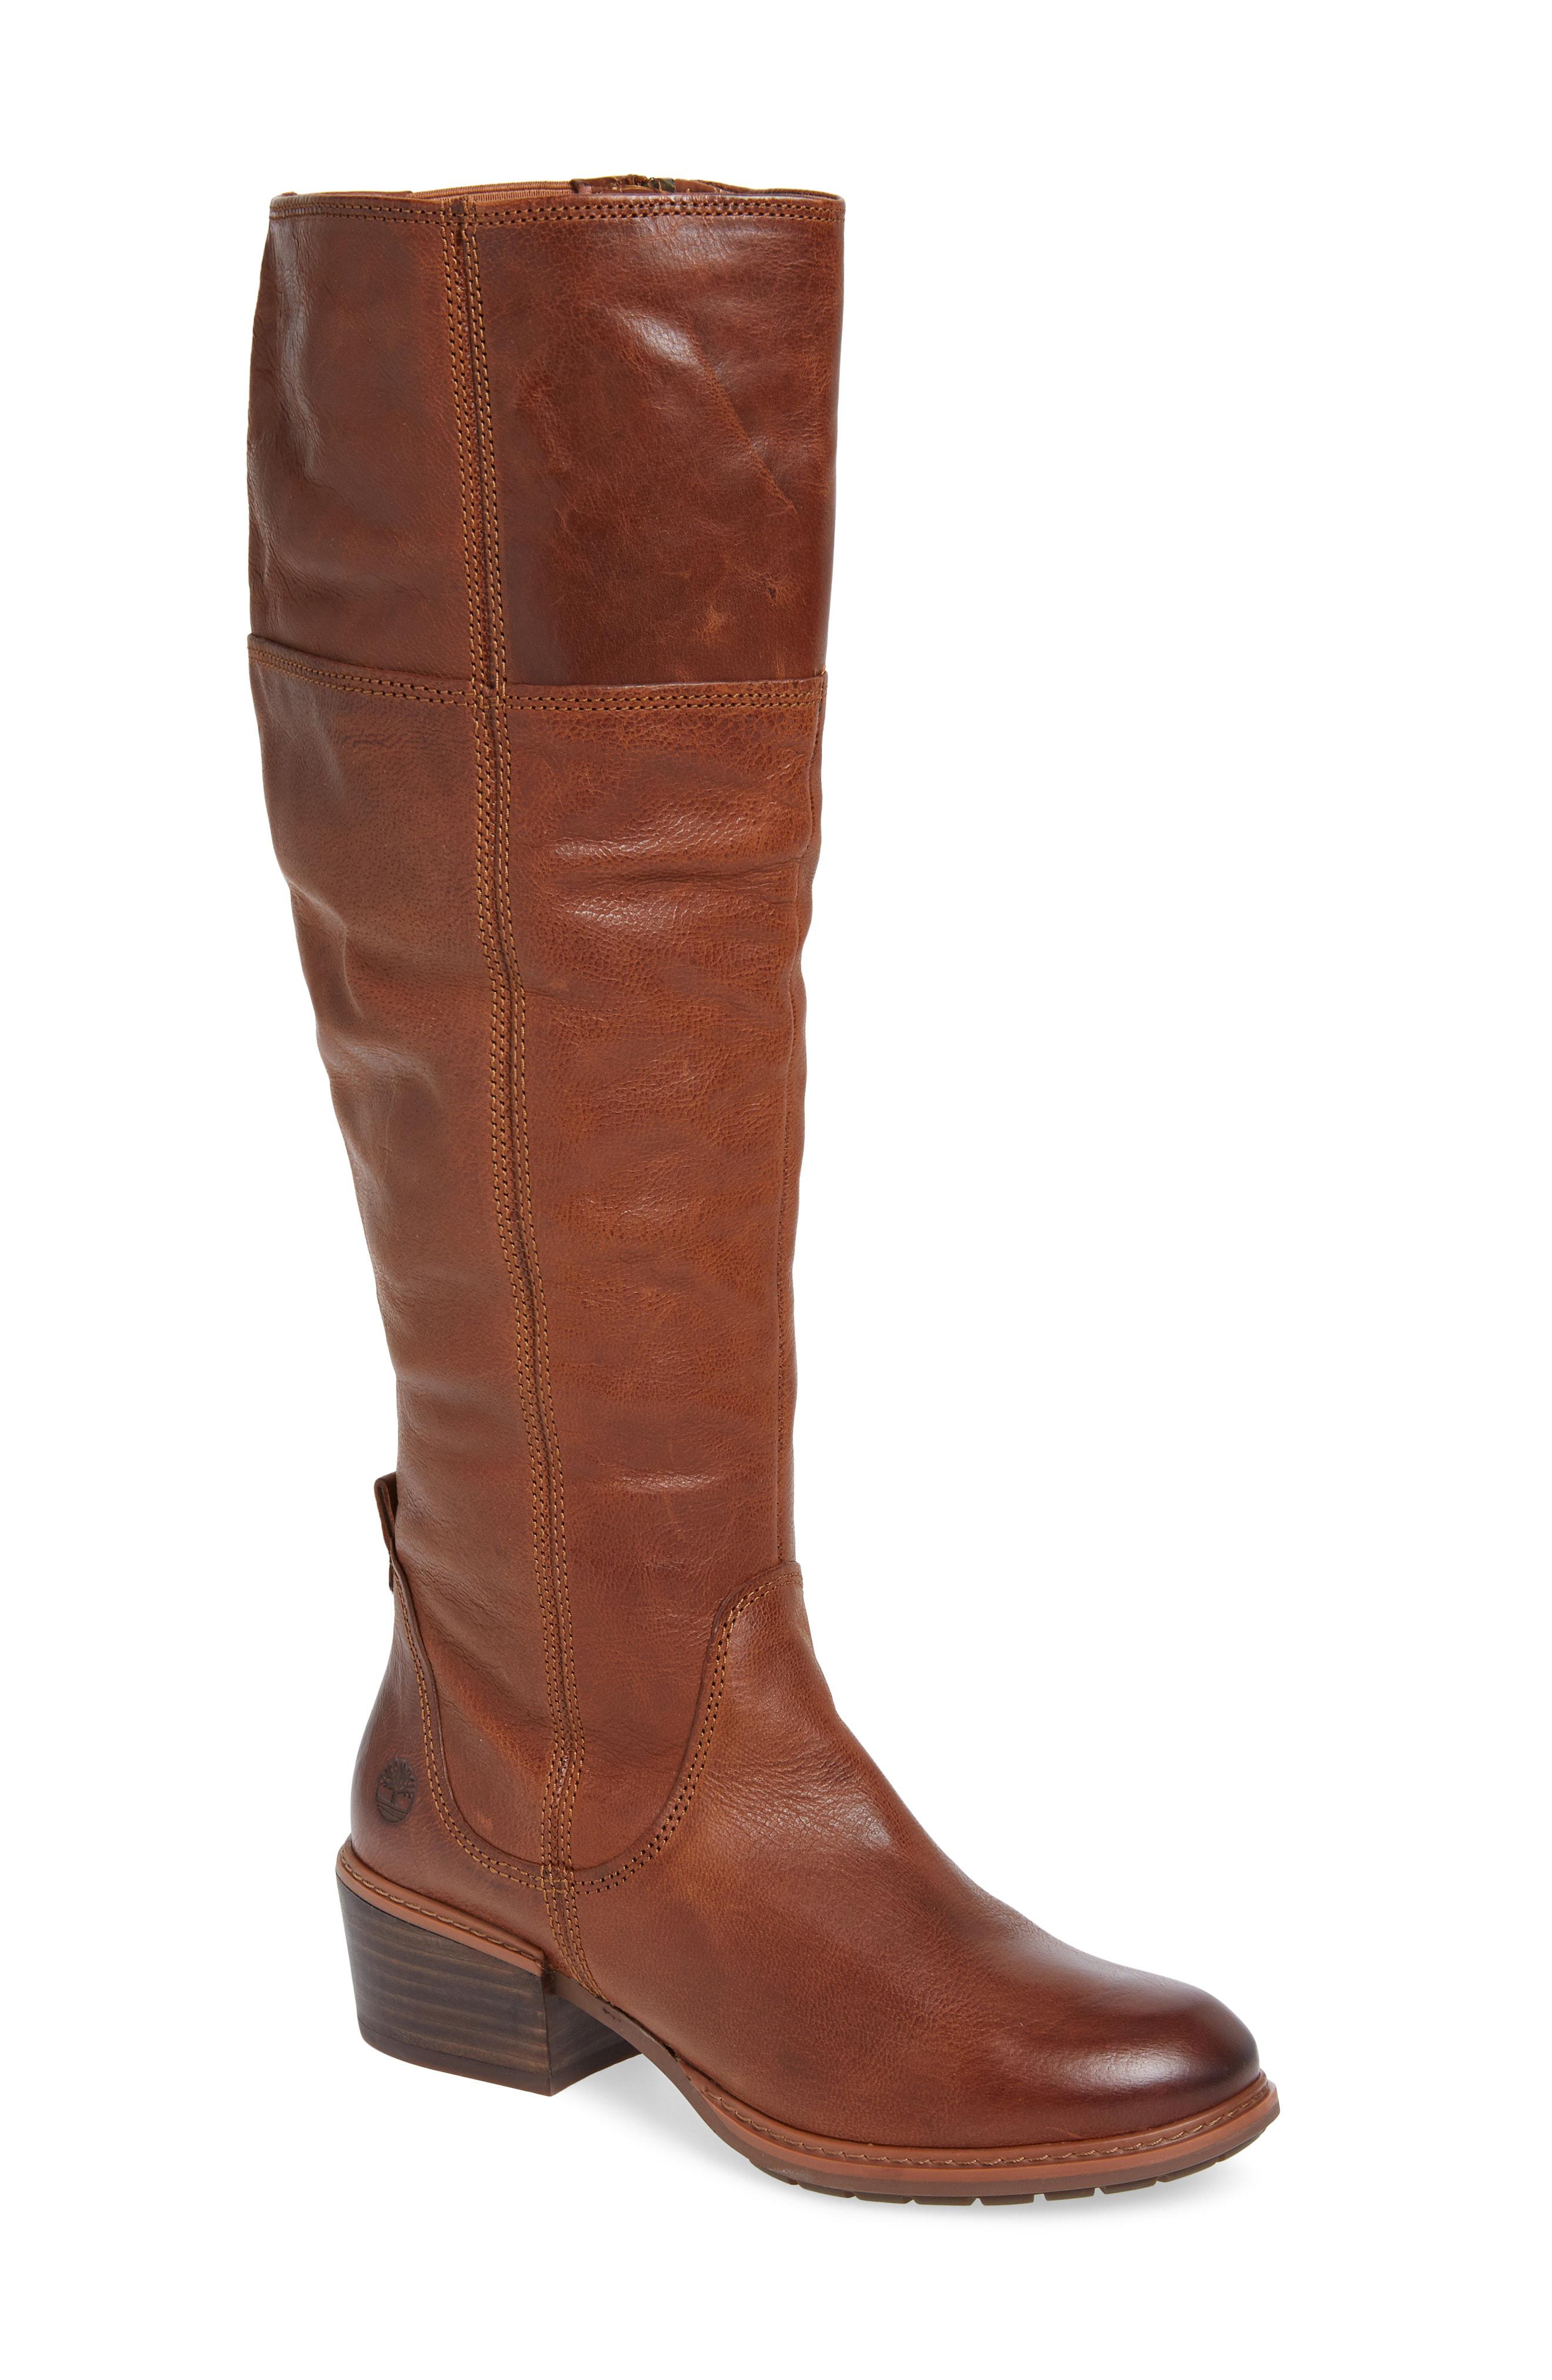 Lyst - Timberland Sutherlin Bay Slouch Knee High Boot in Brown